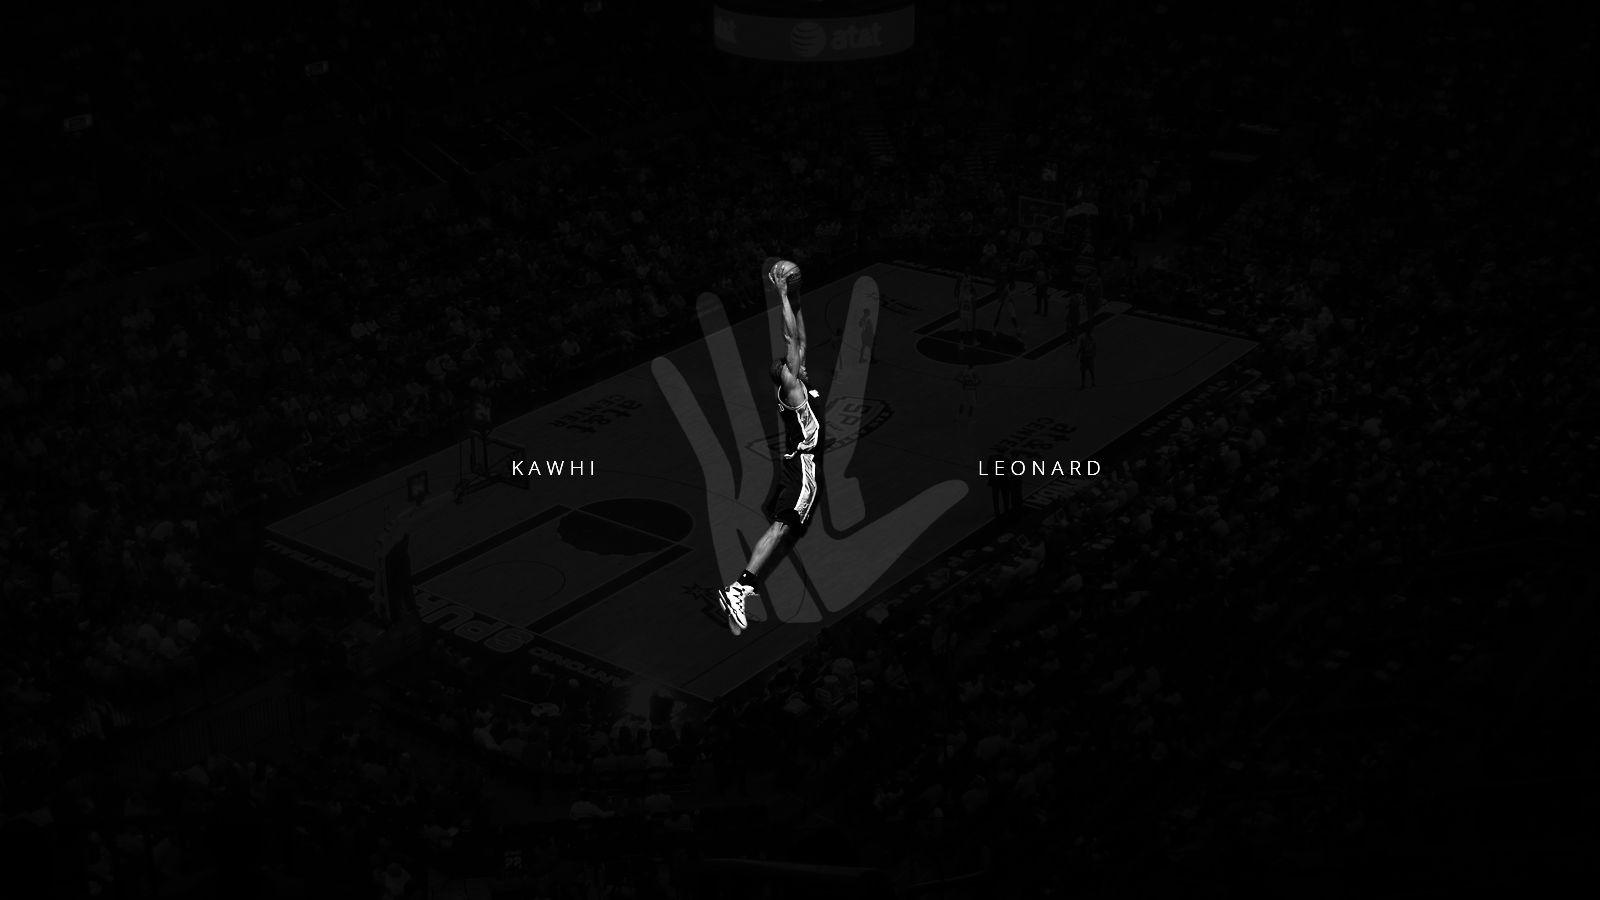 I got bored and decided I needed a new Kawhi desktop background